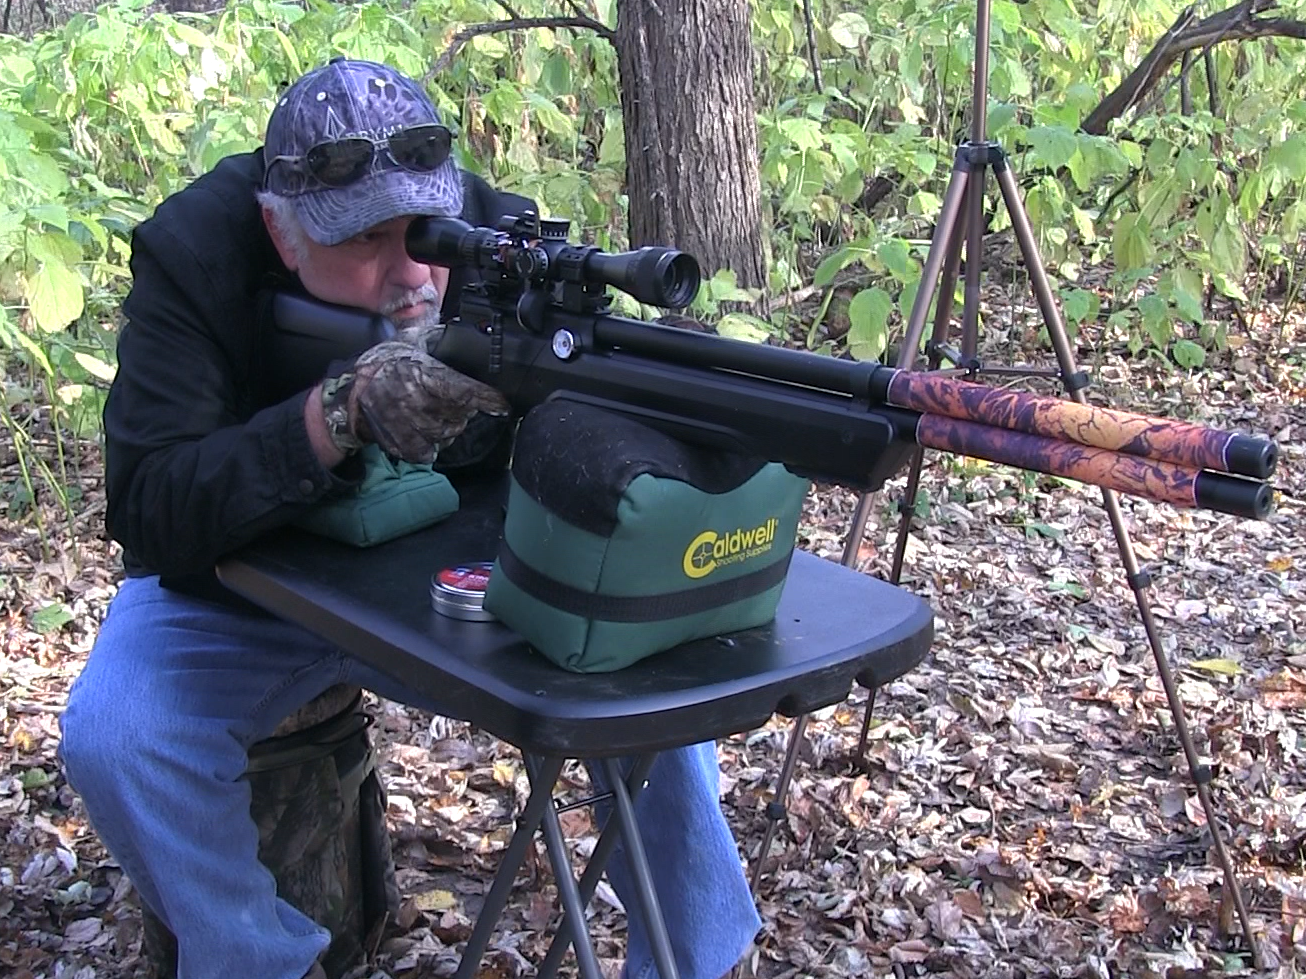 A man shooting an air rifle in the woods